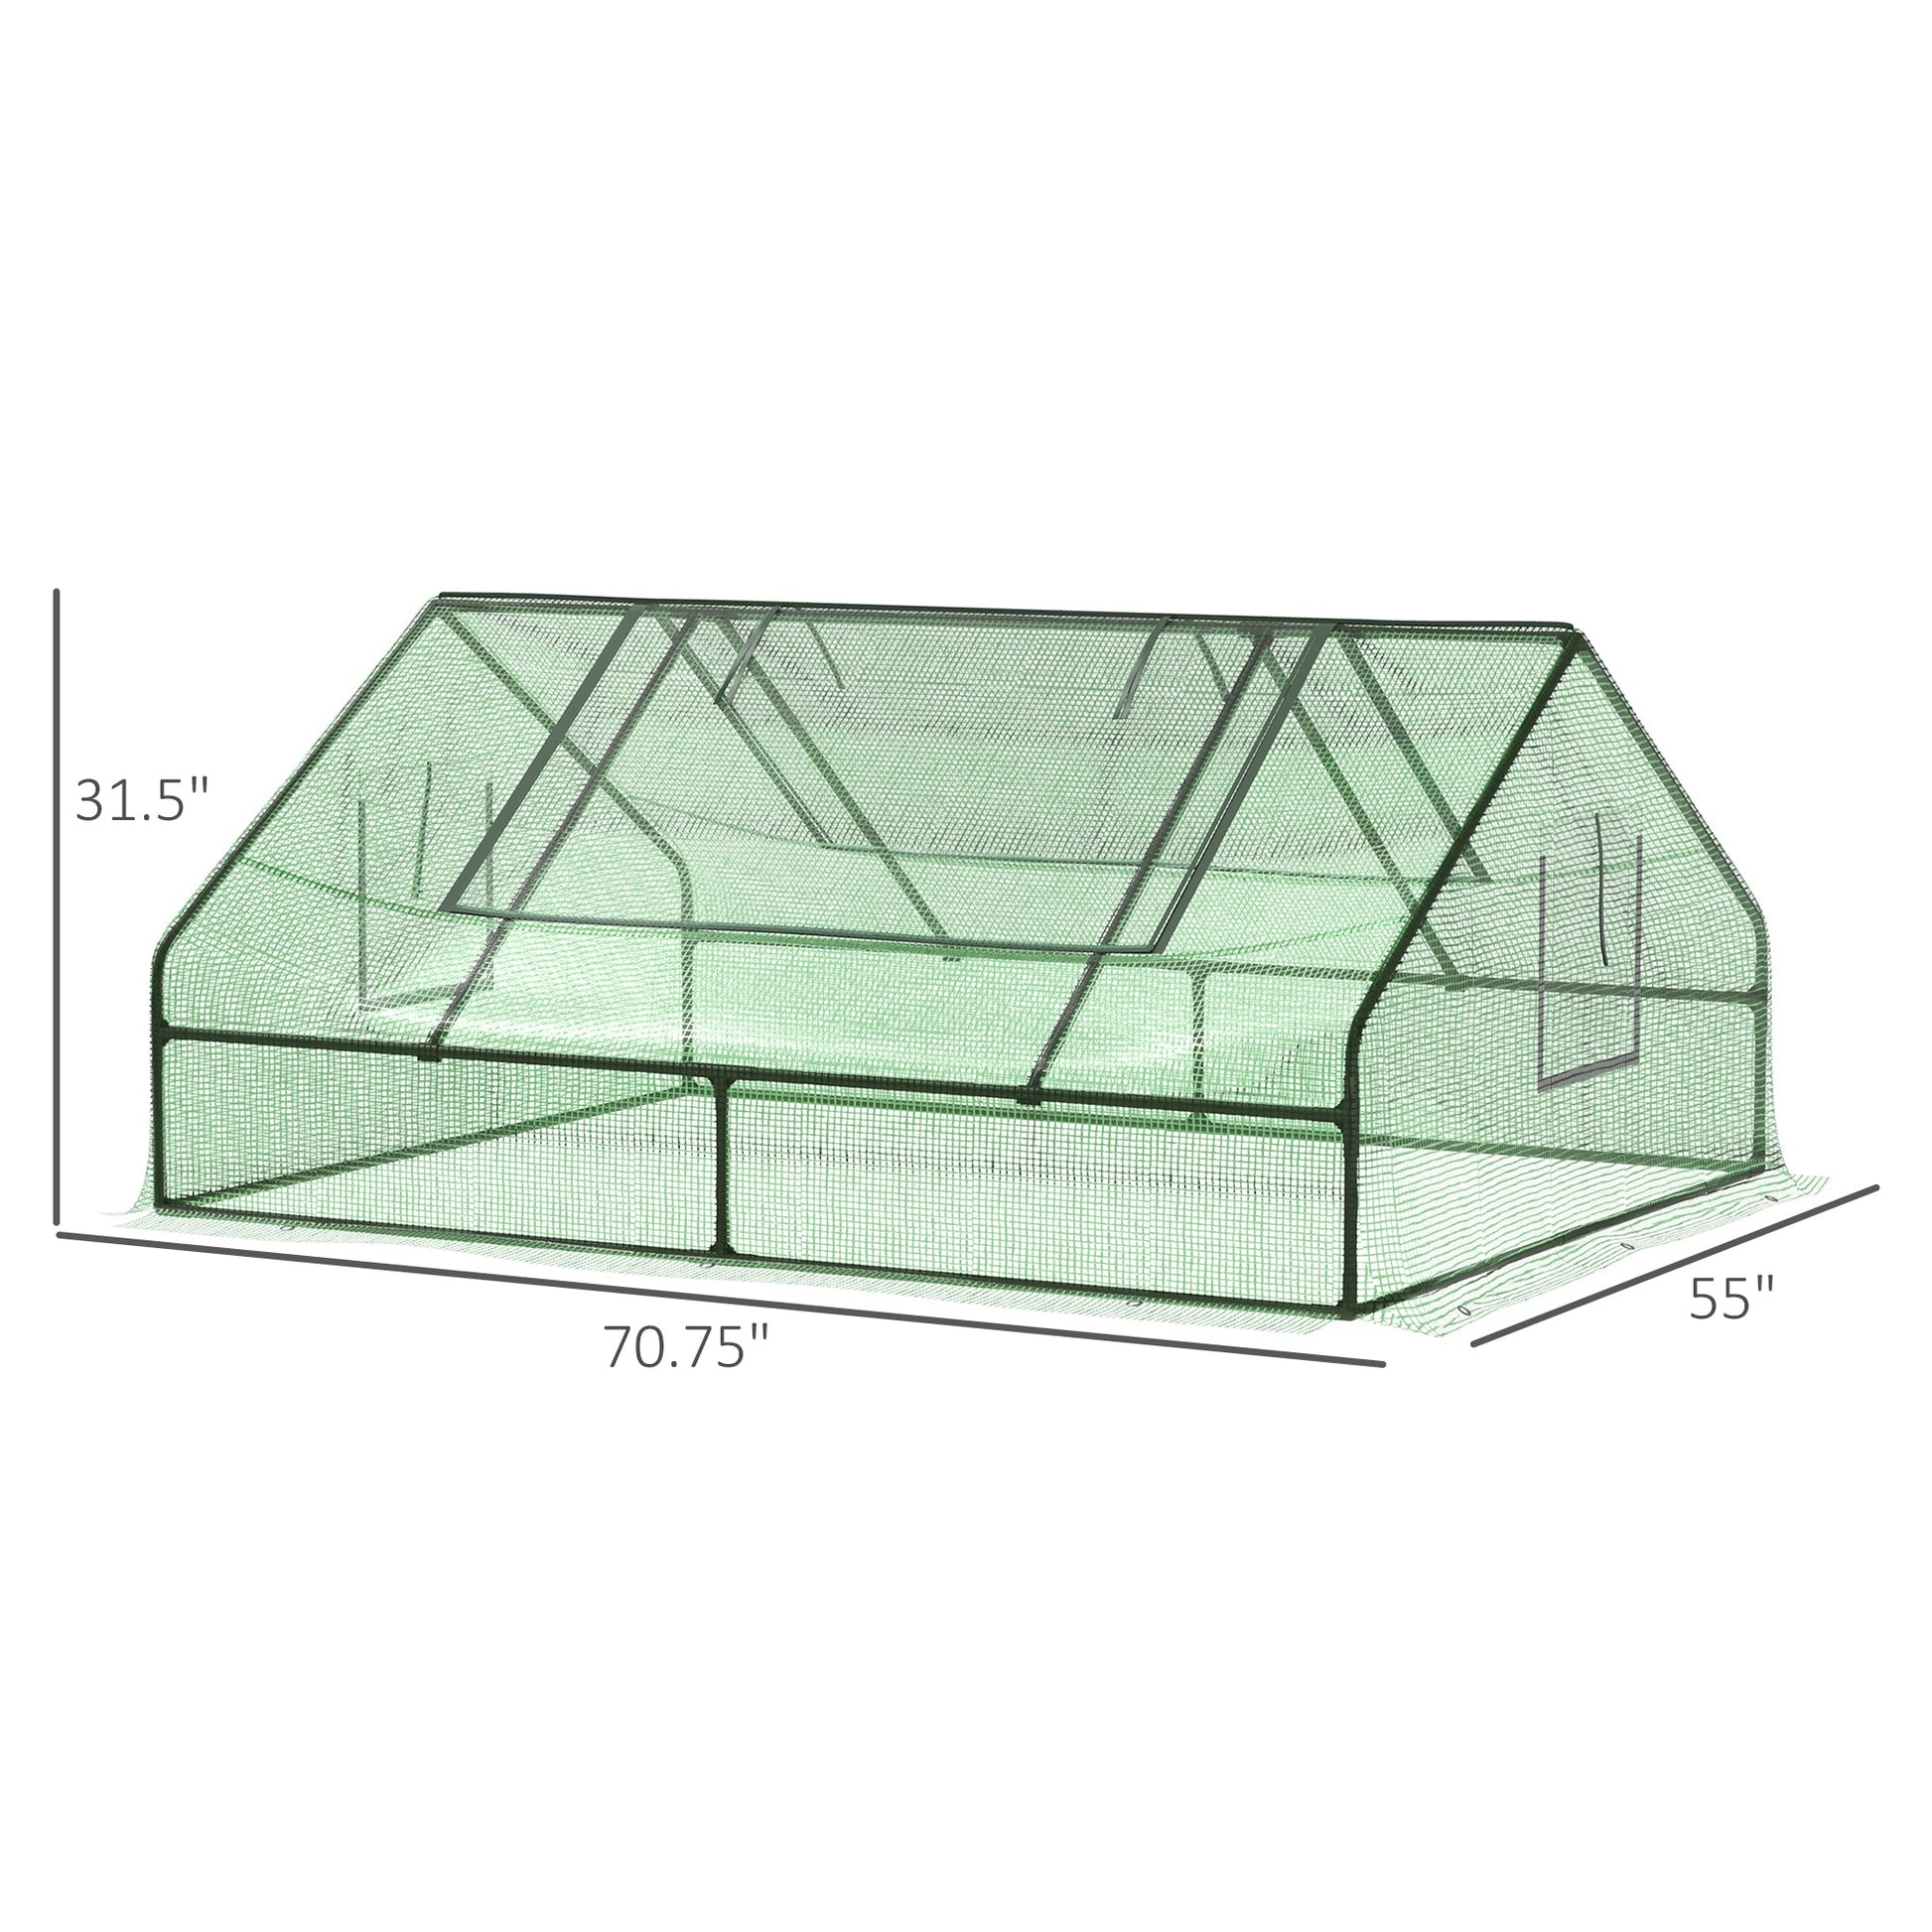 71" x 55" x 32" Mini Greenhouse Portable Hot House for Plants with 2 Large Windows and Ground Nails for Outdoor, Indoor, Garden, Gardening Kit, Green - Gallery Canada